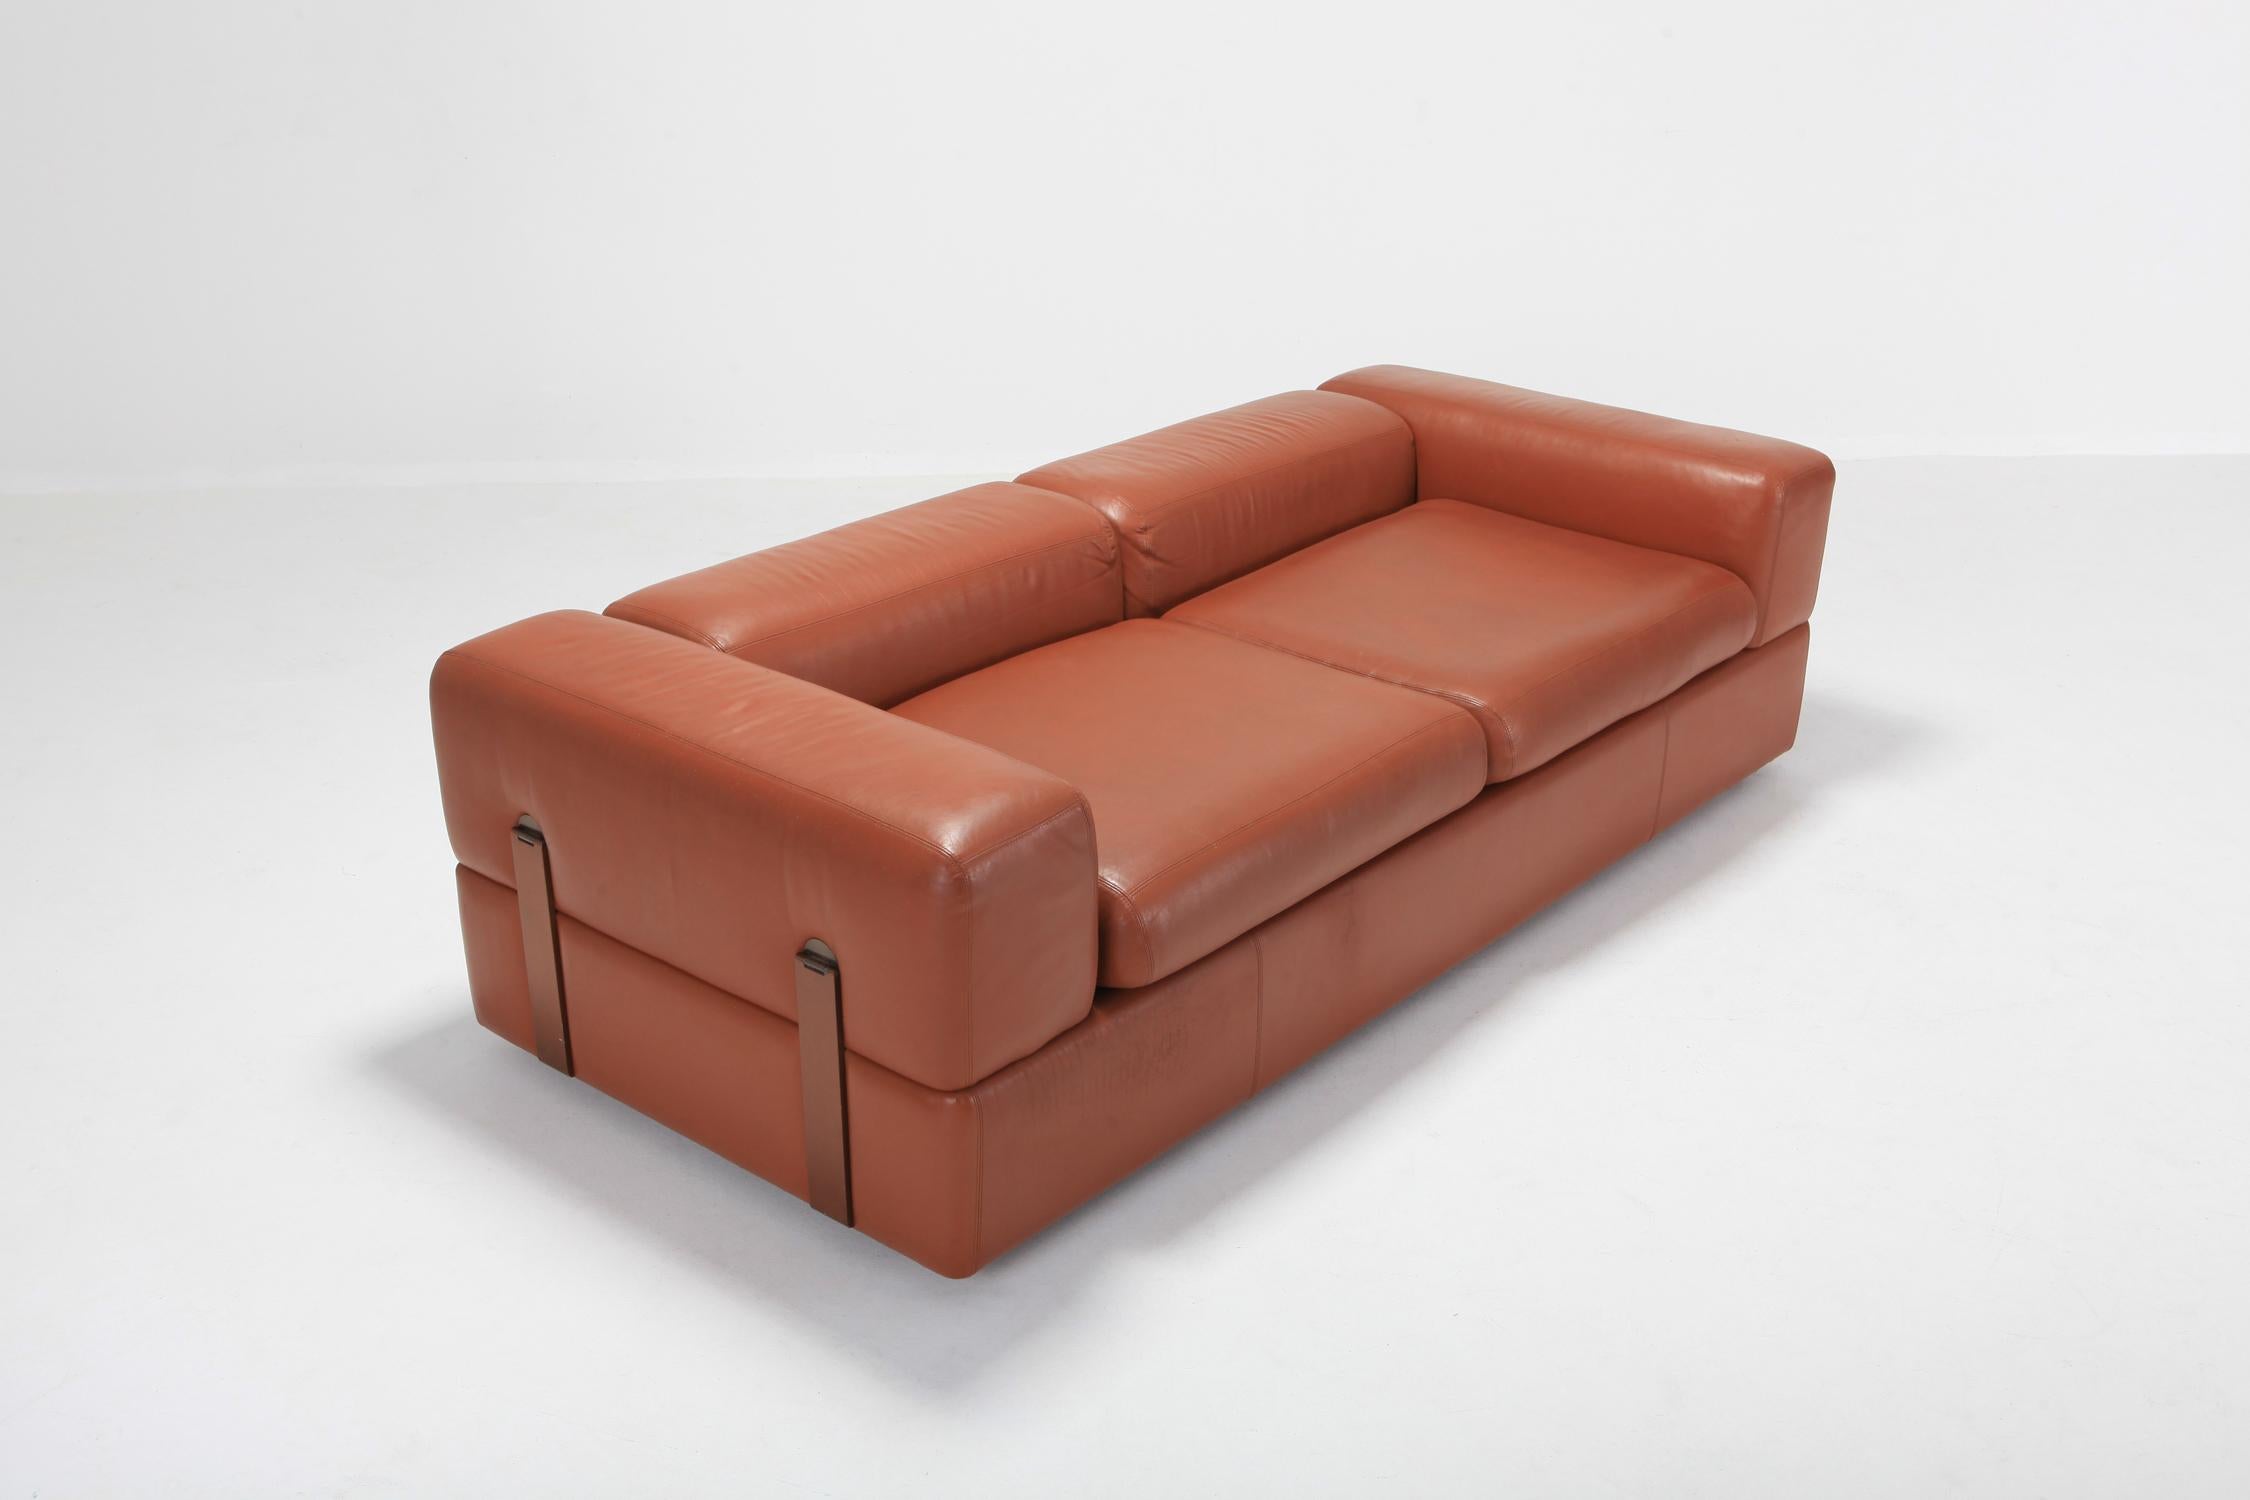 Tito Agnoli for Cinova, sofa bed 711 in cognac leather, Italy, 1960s 

Postmodern Space Age sofa which can be converted in a daybed, designed by Tito Agnoli and manufactured by Cinova. 
A truly stunning design, just look at the copper patinated